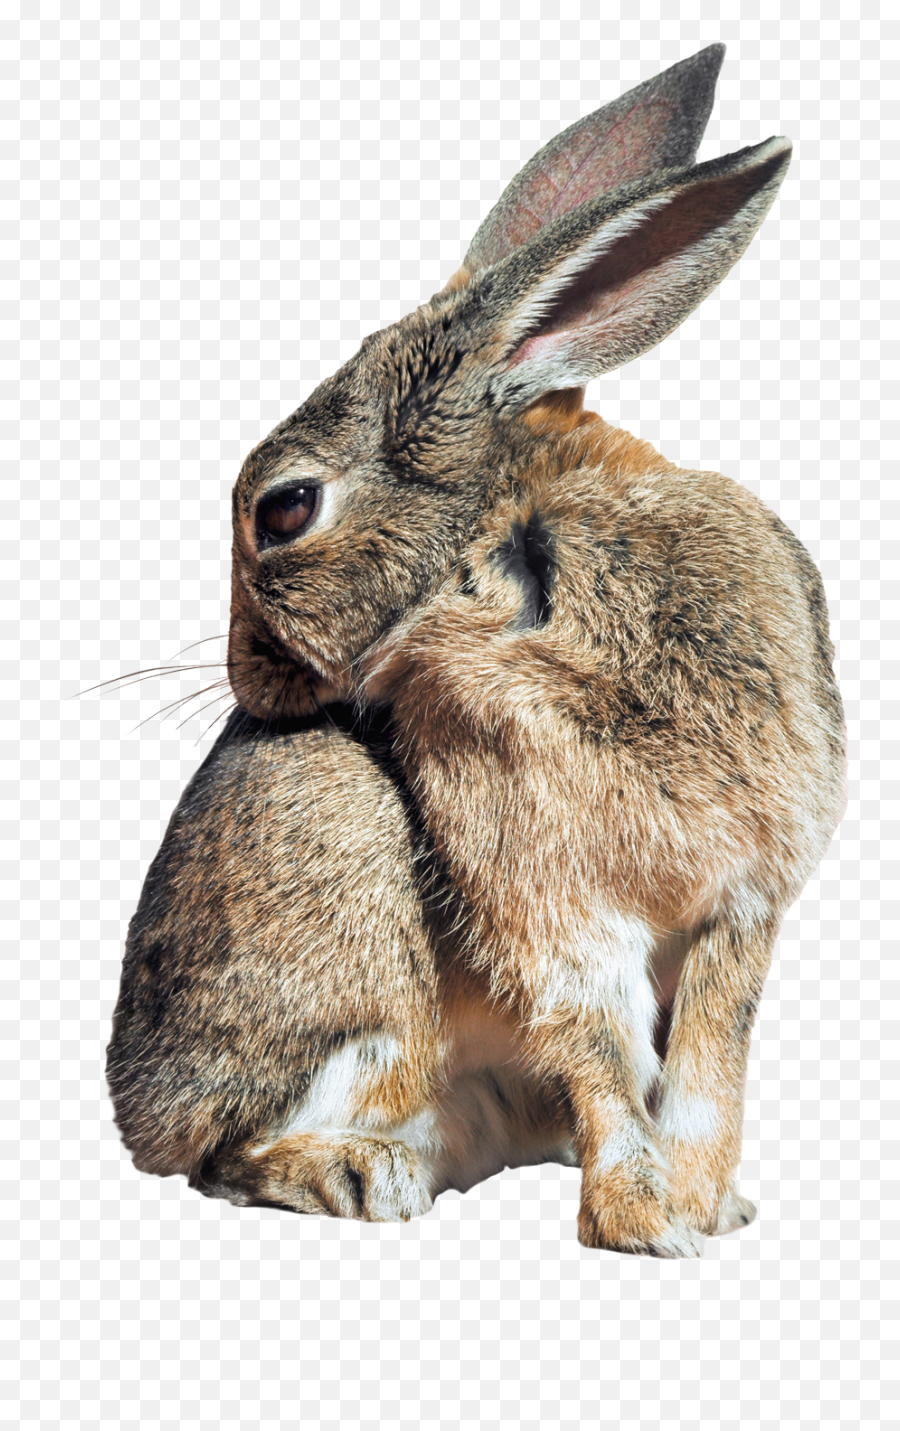 Bunny Rabbit Png Image For Free Download - Rabbit Png,Rabbit Png